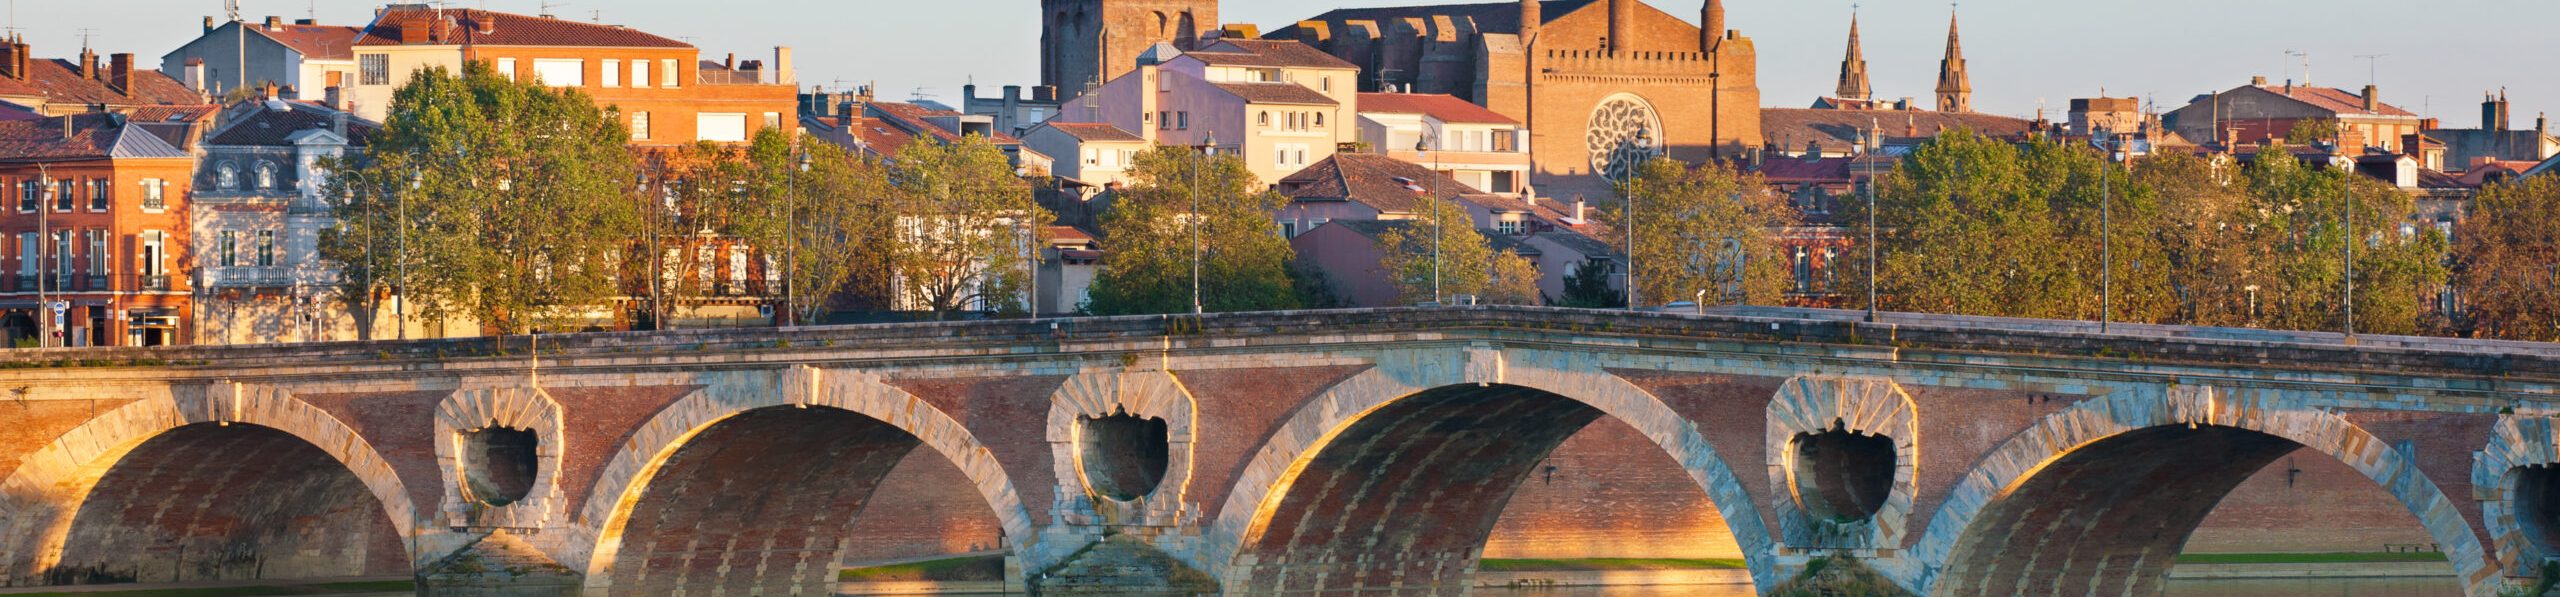 The,Pont,Neuf,In,Toulouse,In,A,Summer,Evening